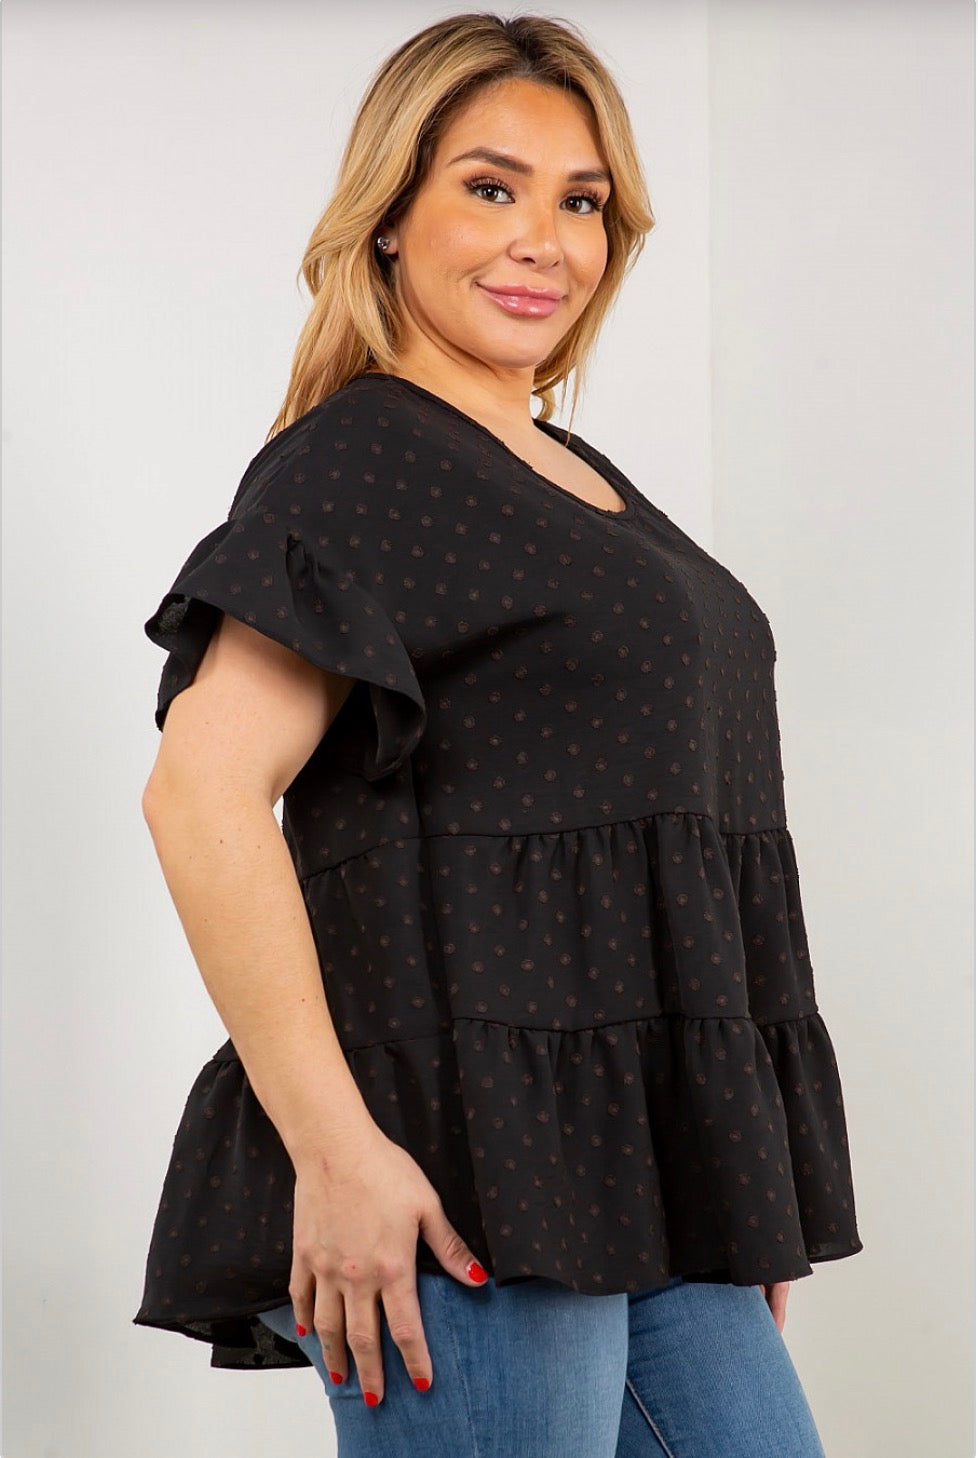 A woman wearing a Dot Ruffle Sleeve, Multi Tier Tunic Top from Spin USA.